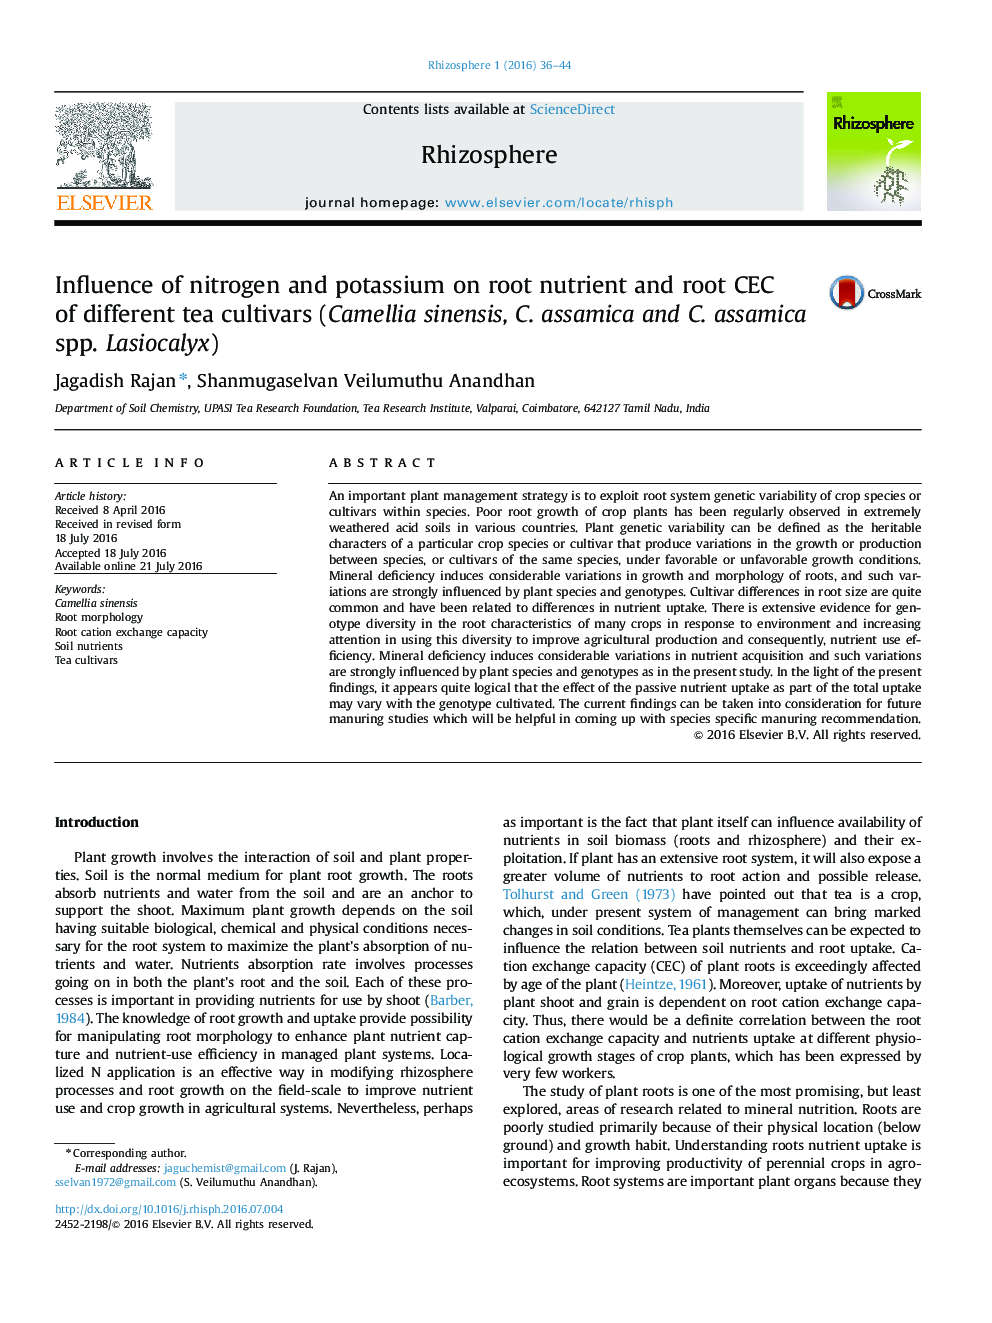 Influence of nitrogen and potassium on root nutrient and root CEC of different tea cultivars (Camellia sinensis, C. assamica and C. assamica spp. Lasiocalyx)